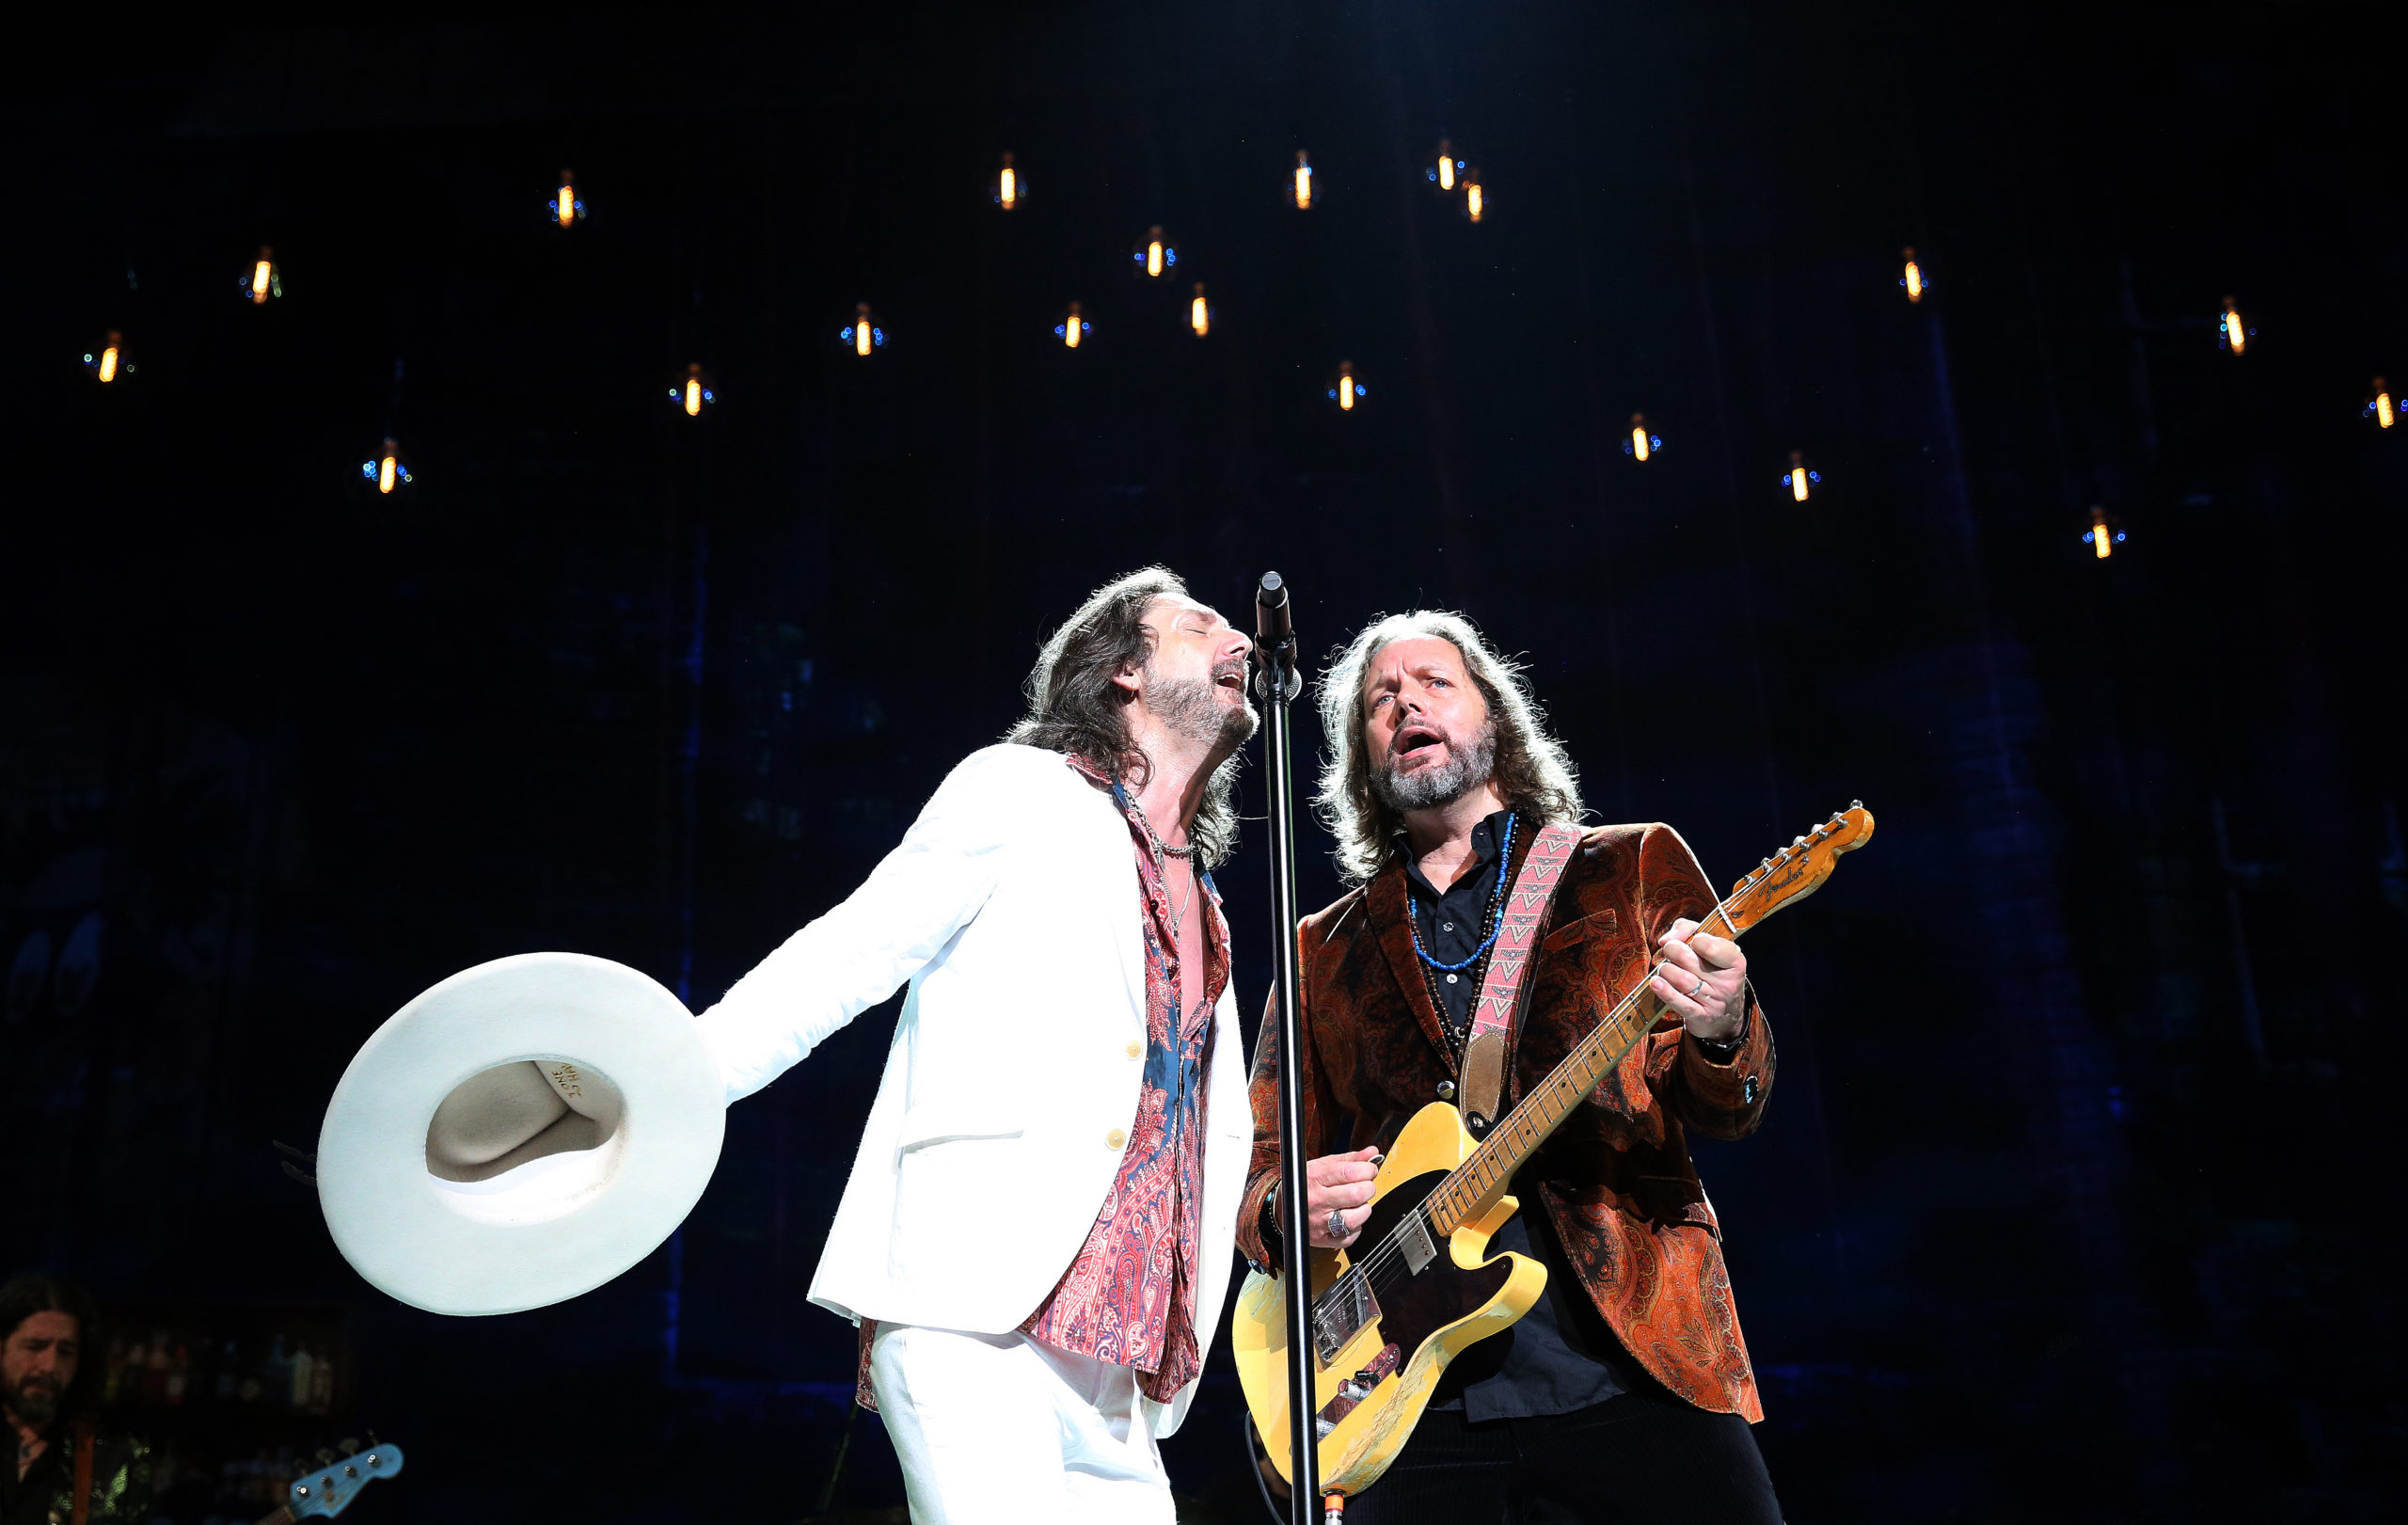 Reunited The Black Crowes on the money for Hollywood Casino Amp’s